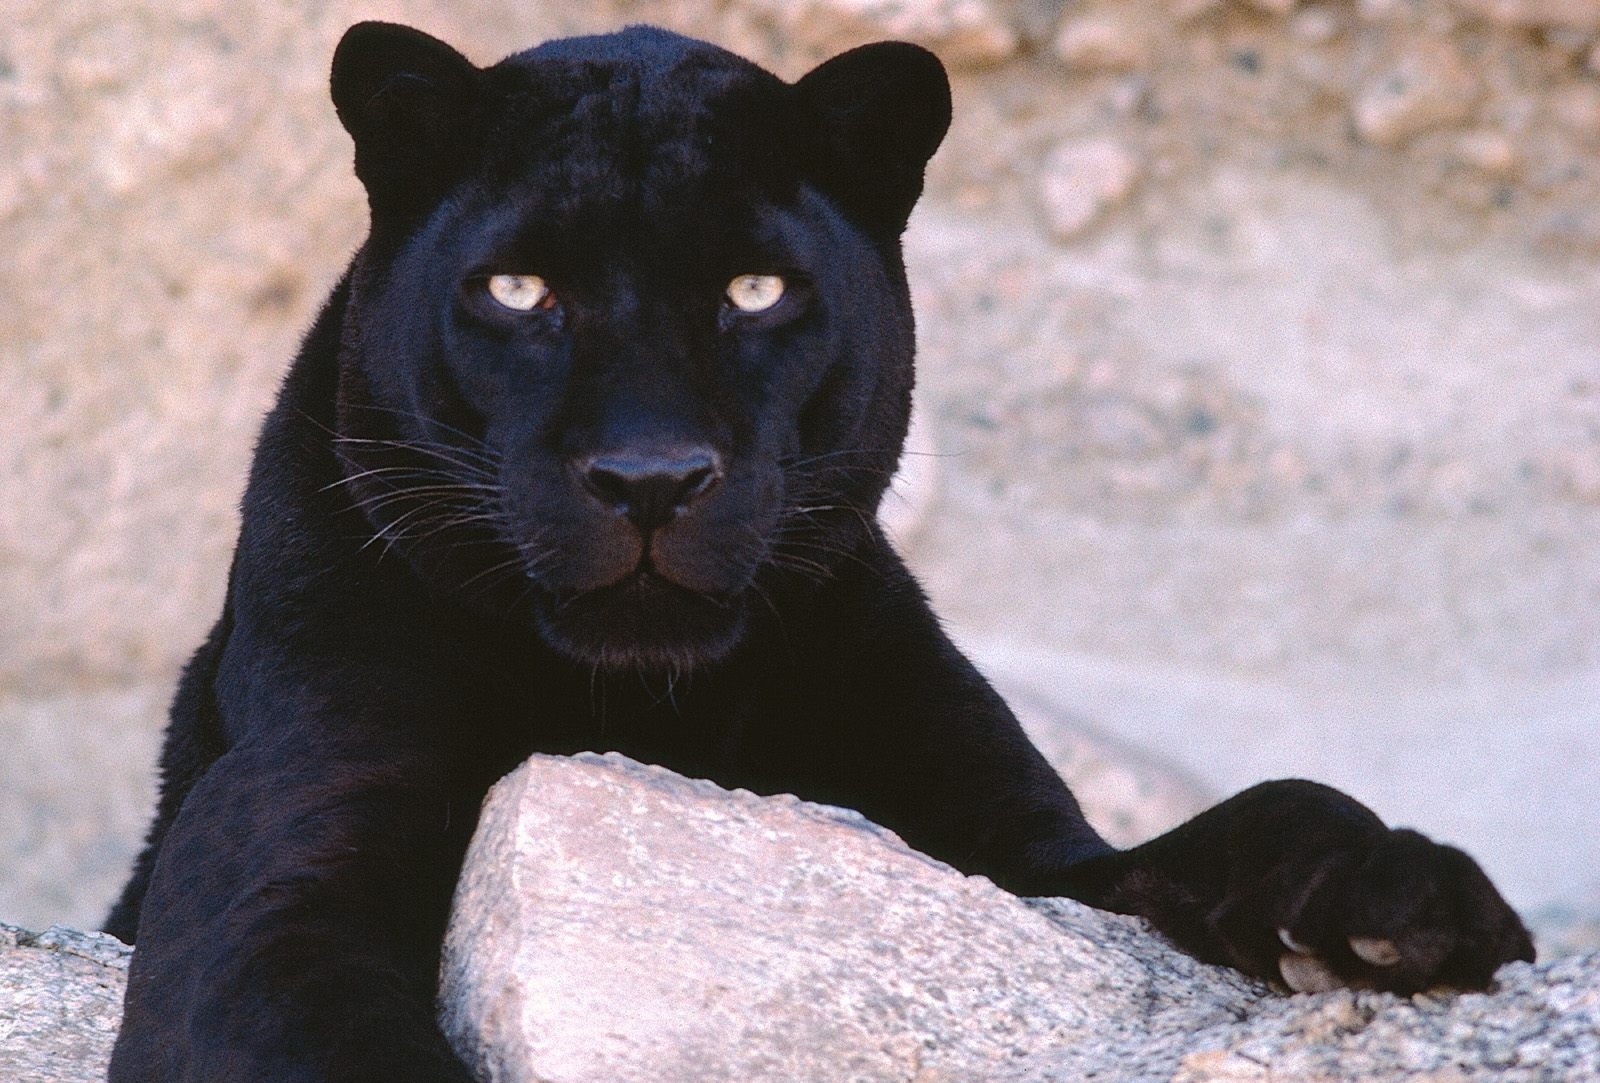 Big Black Cats Wallpapers | Animal Wallpapers | Wild Animal | Facts ...